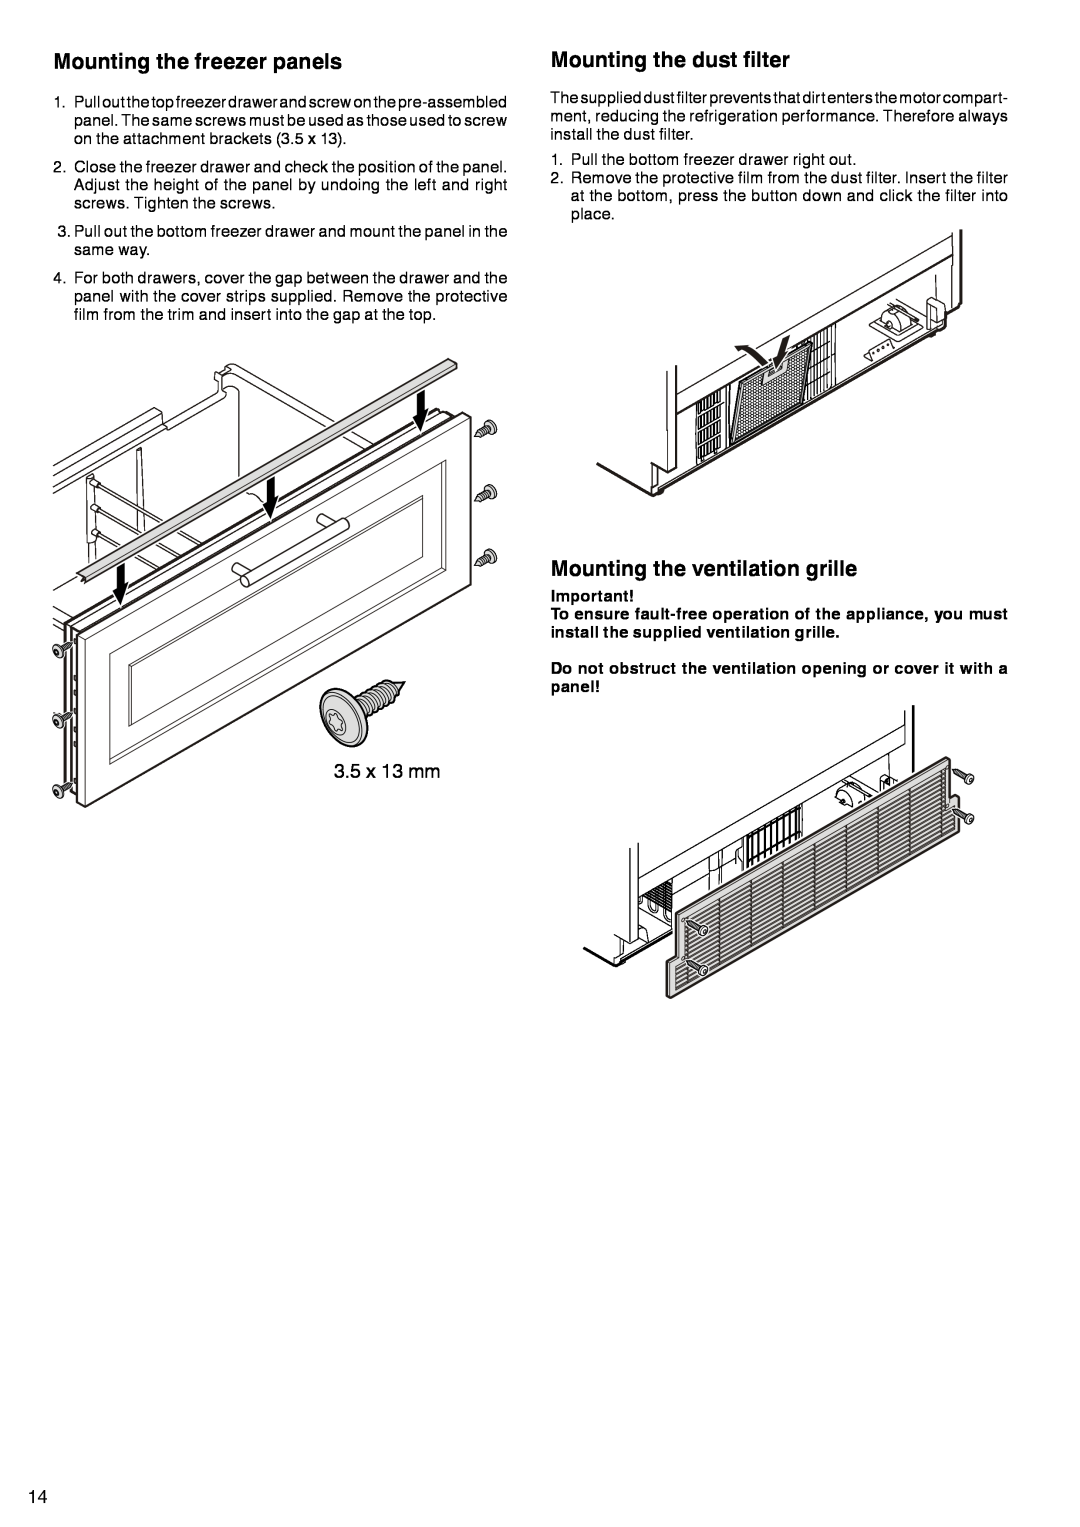 Liebherr 7083-103-00 Mounting the freezer panels, Mounting the dust filter, Mounting the ventilation grille, 3.5 x 13 mm 